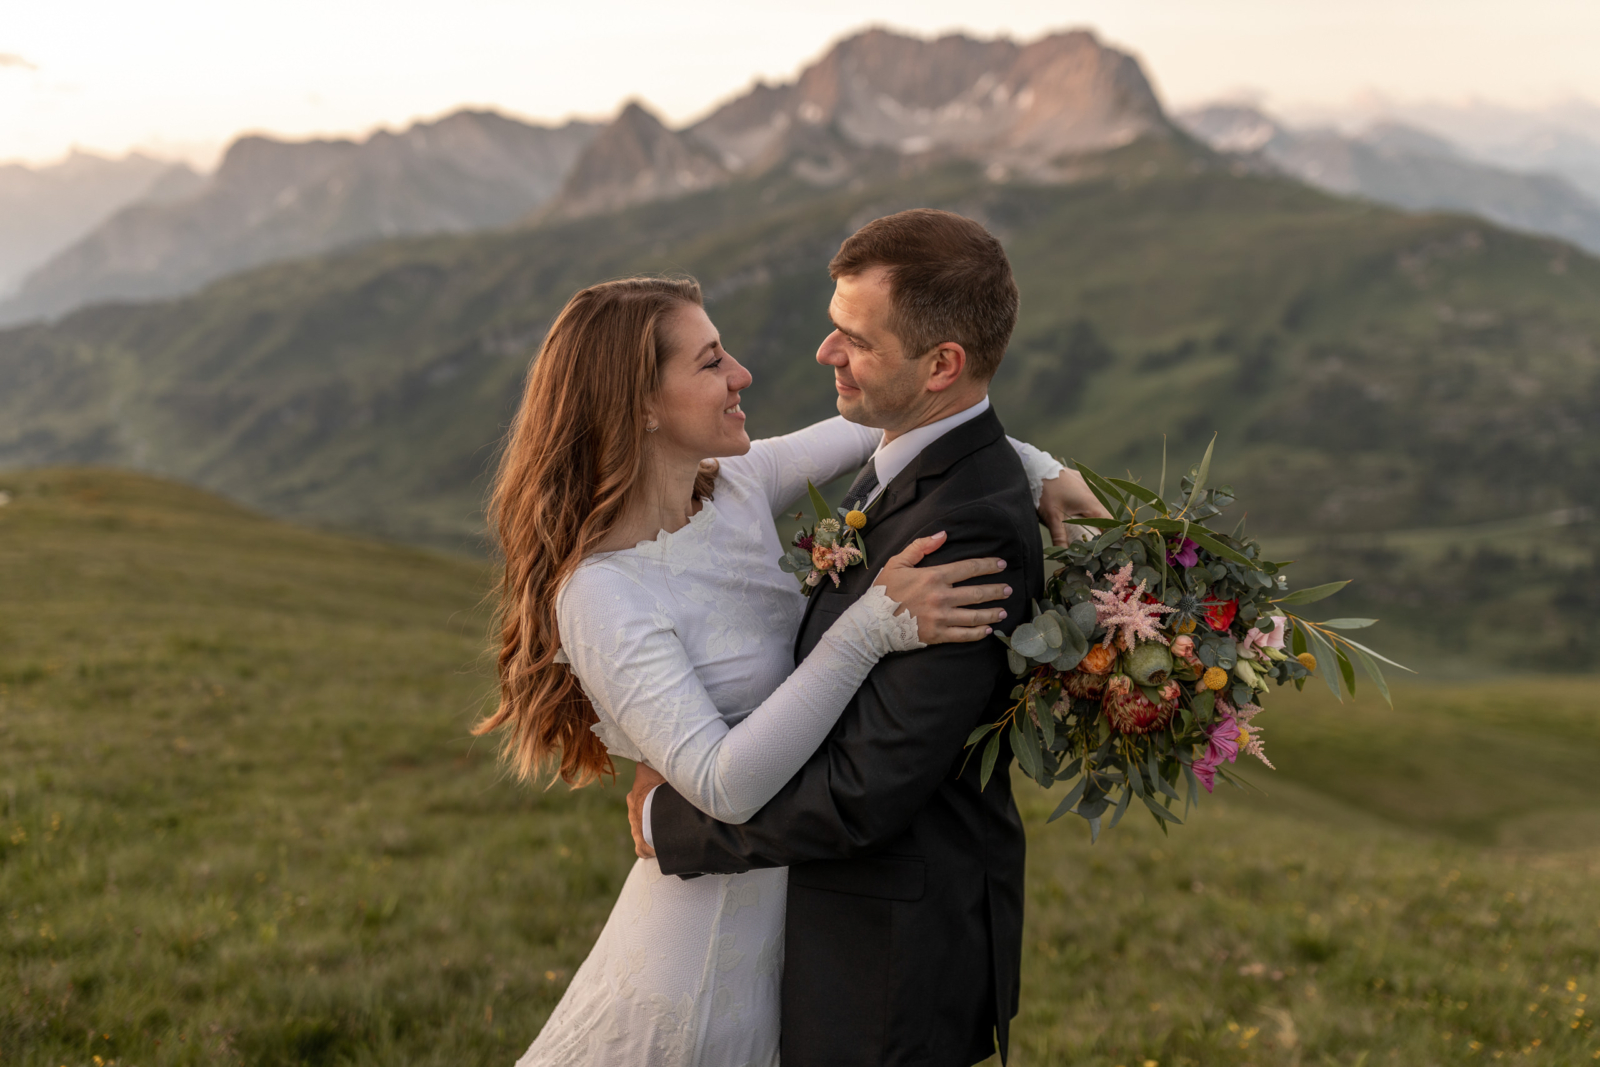 Wedding Photos in the Mountains in Europe